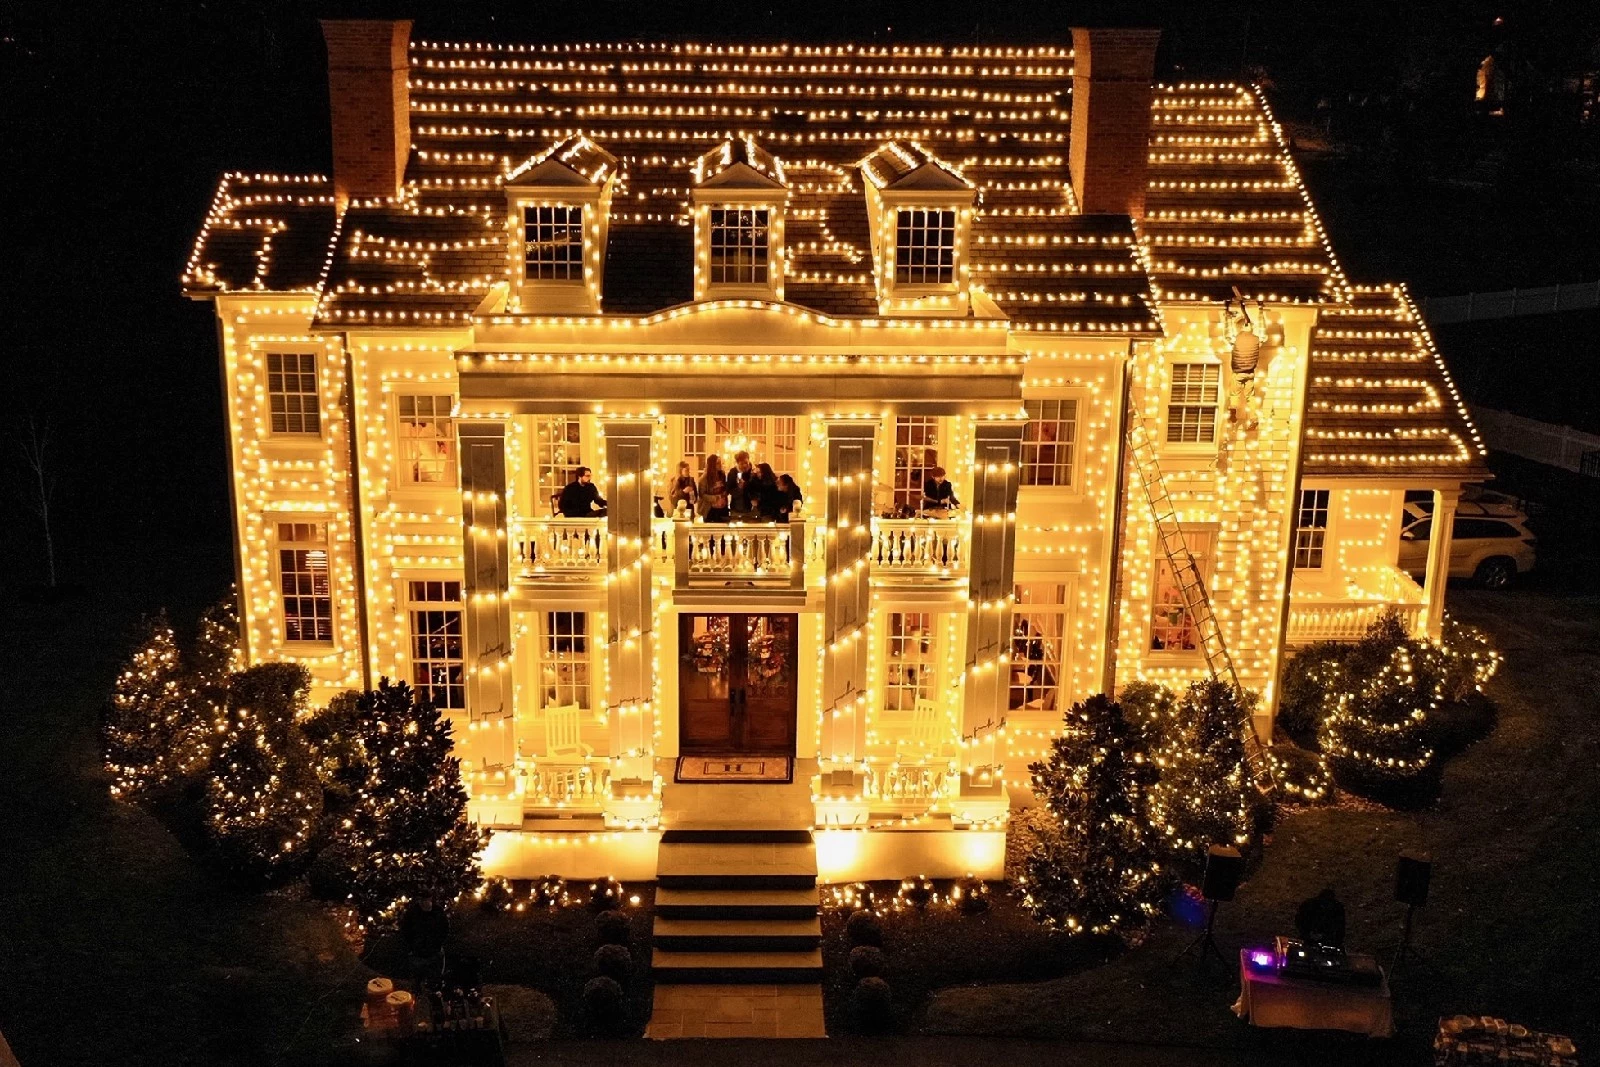 South Jersey man recreates 'Christmas Vacation' lights — complete